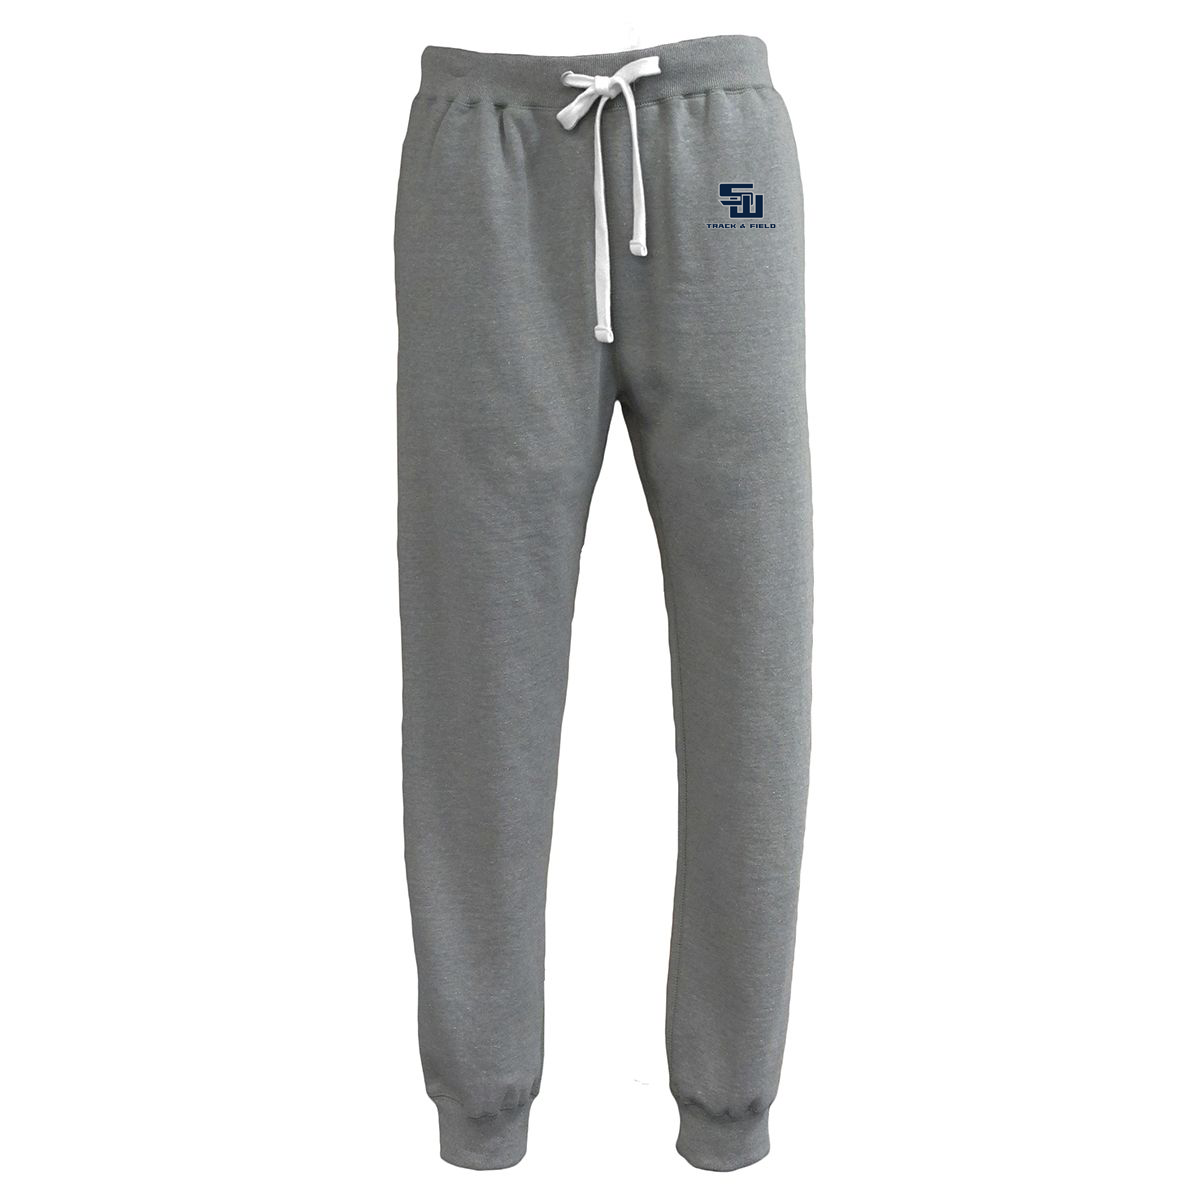 Smithtown West T&F Joggers